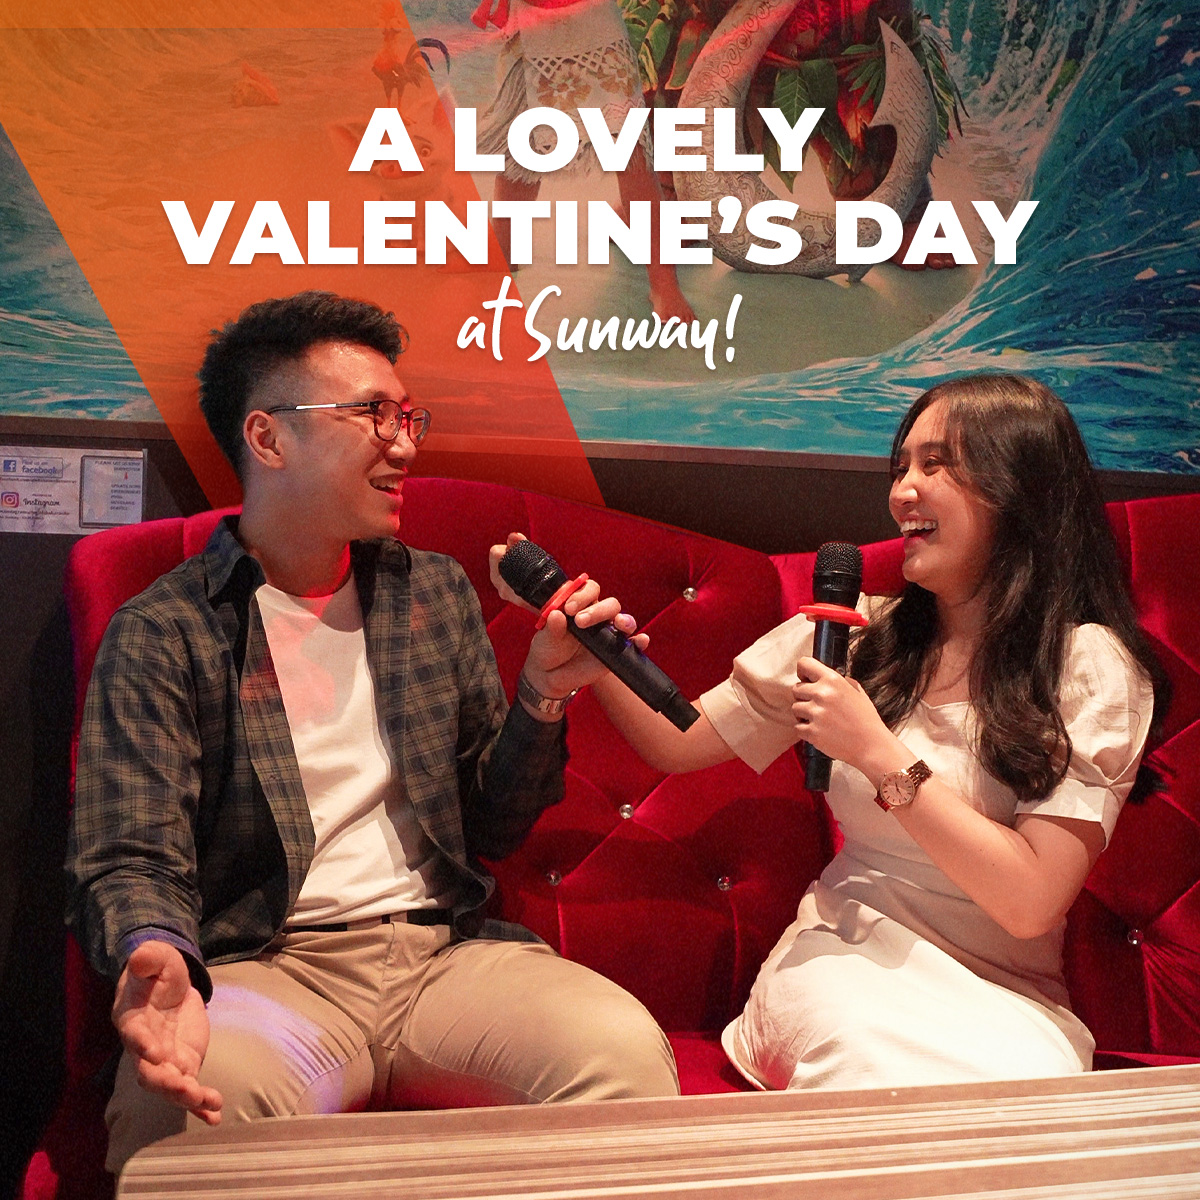 Love is in the Air at Sunway City Kuala Lumpur!